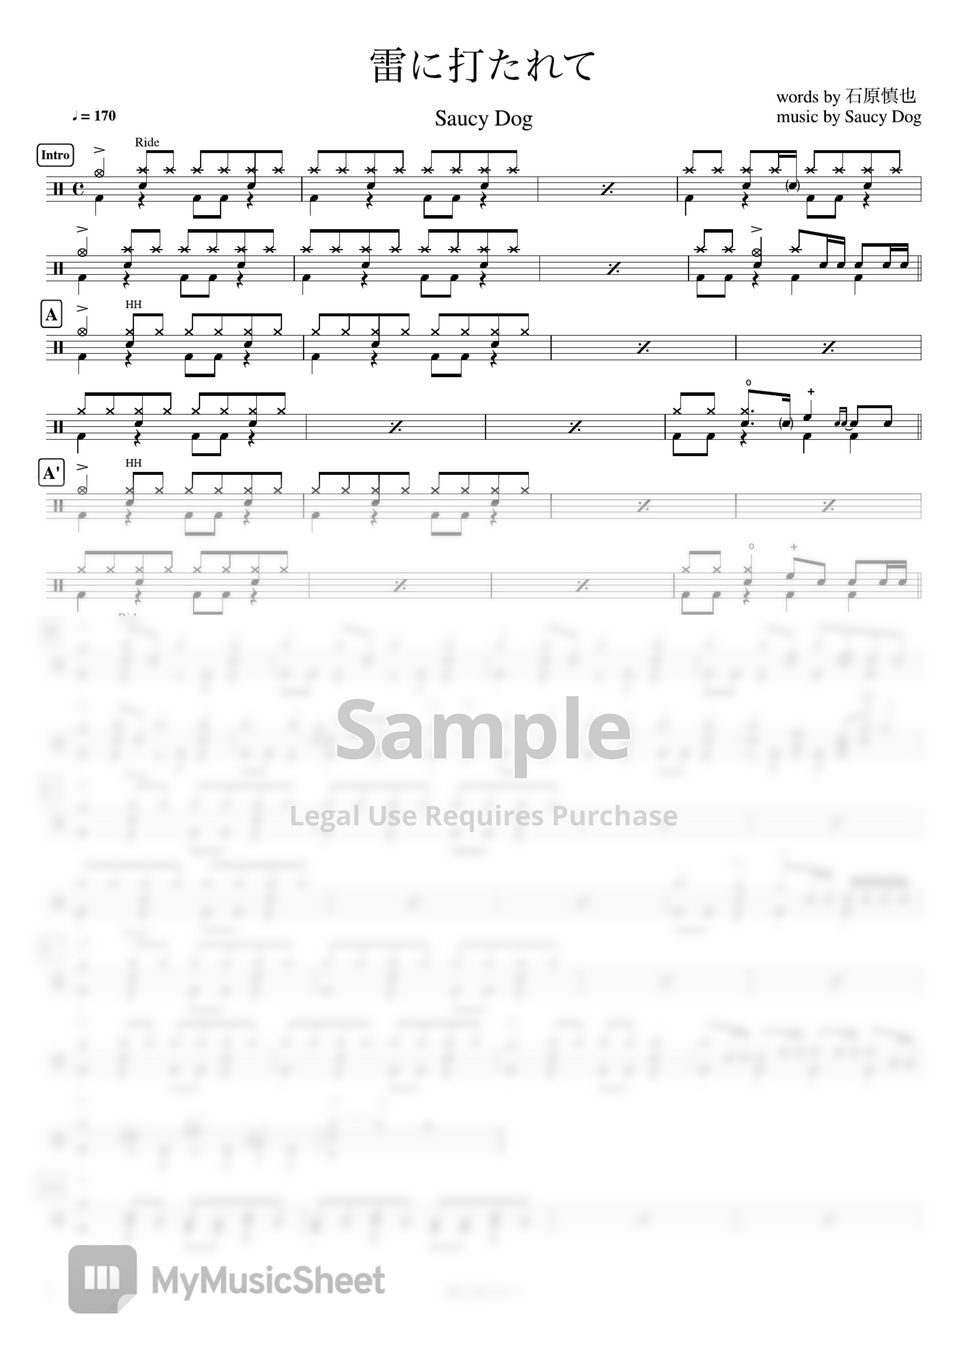 Saucy Dog - 雷に打たれて by Cookai's J-pop Drum sheet music!!!